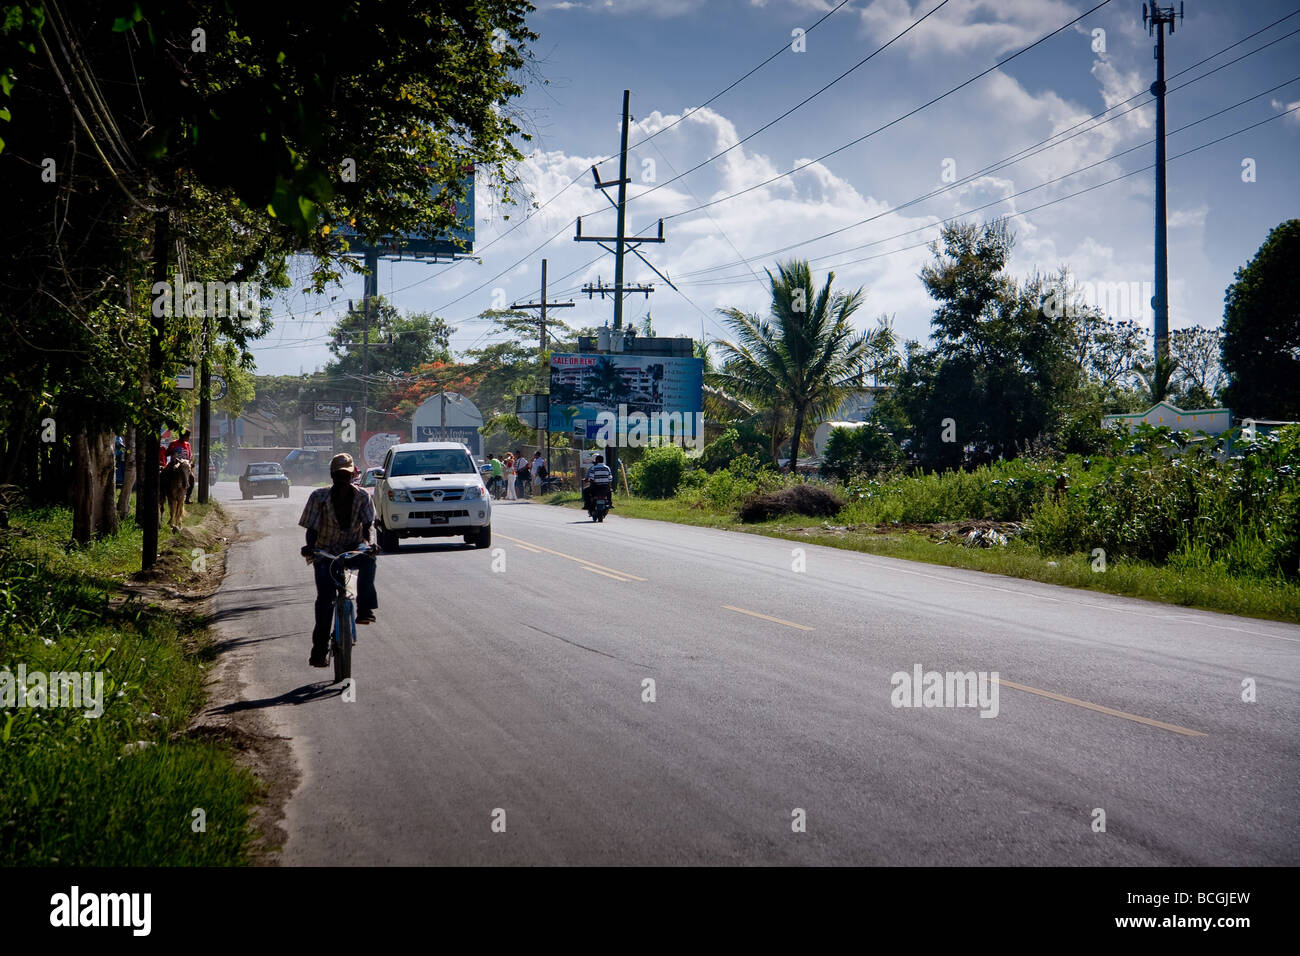 The view from the side of a busy road in Sosua, Dominican Republic showing cars, motorbikes, mopeds, trucks and horses passing b Stock Photo